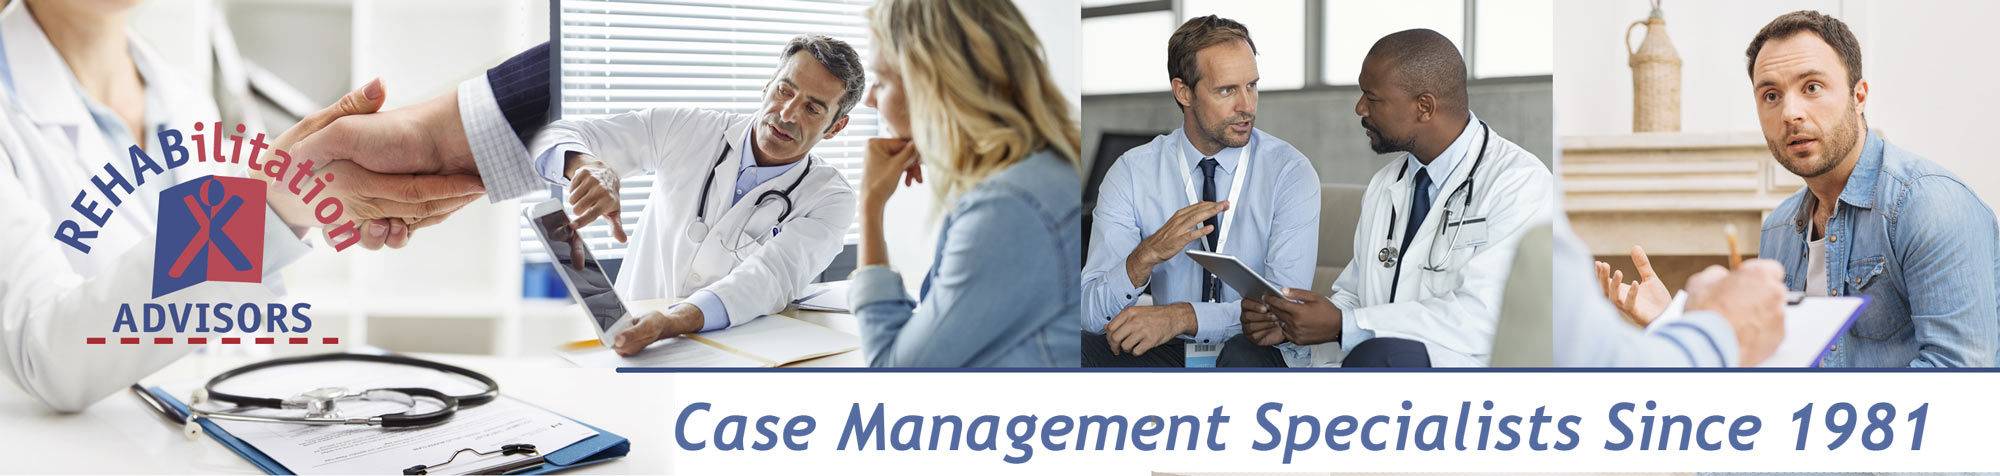 Rehab Advisors-Case Management Specialists Since 1981